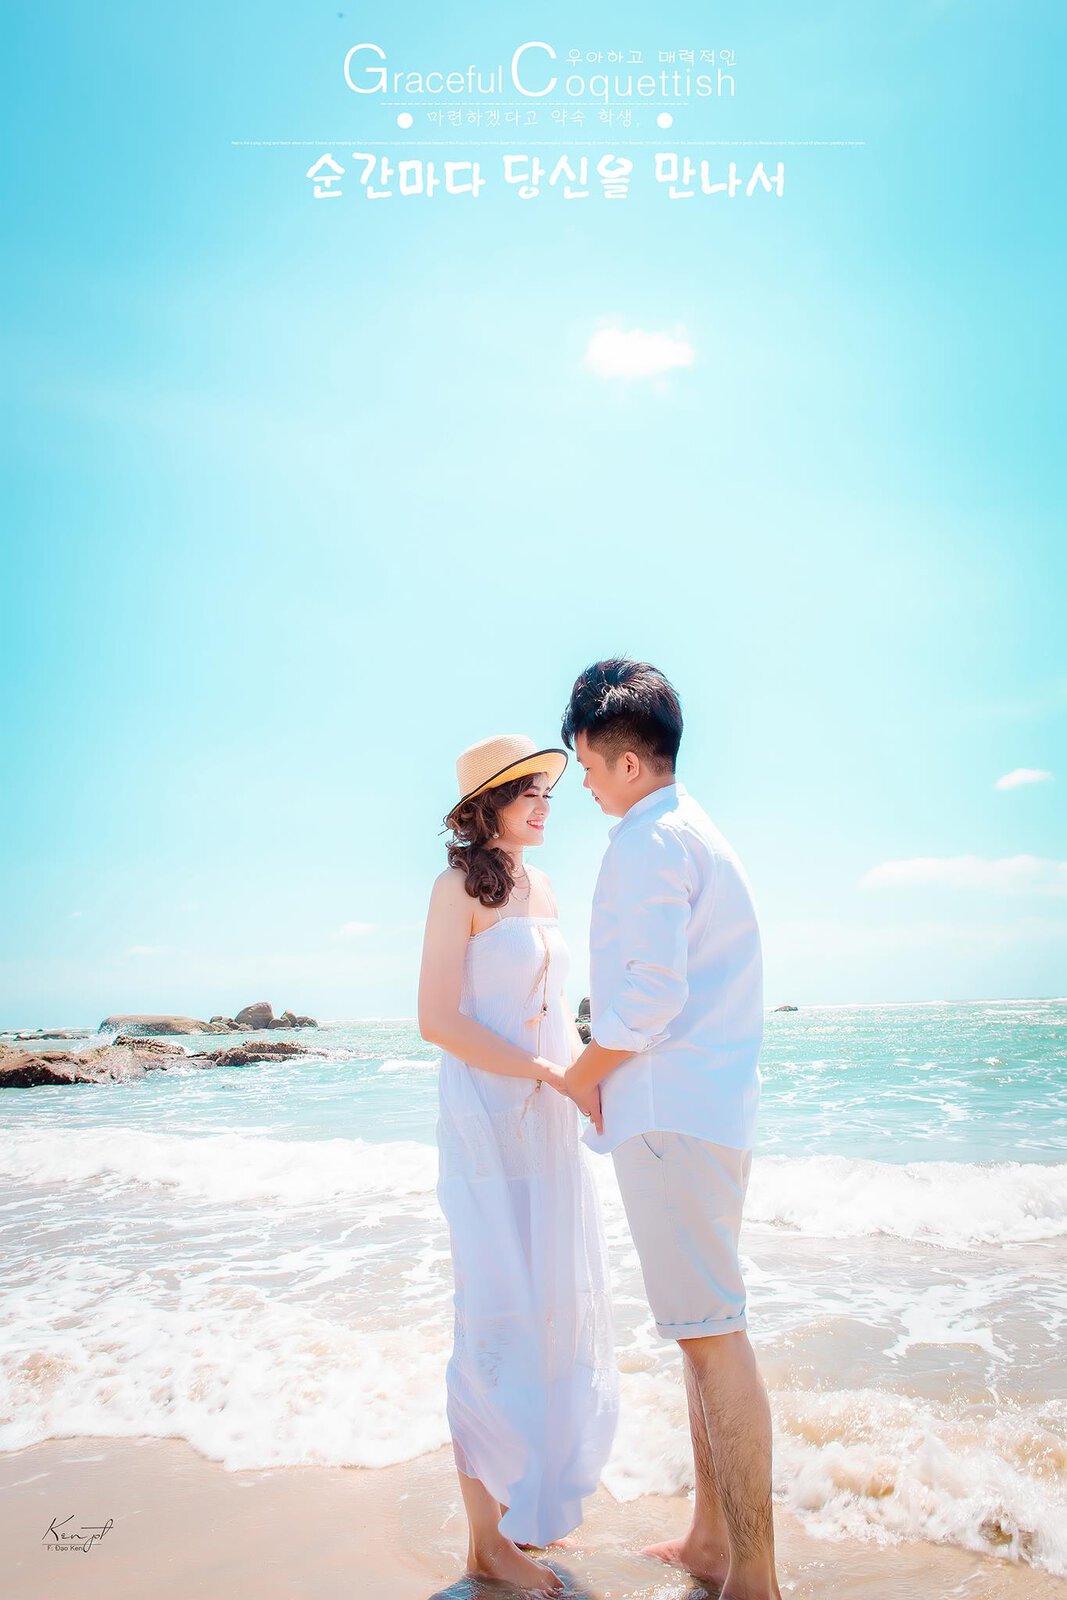 anh-chup-couple-han-quoc-5.jpg